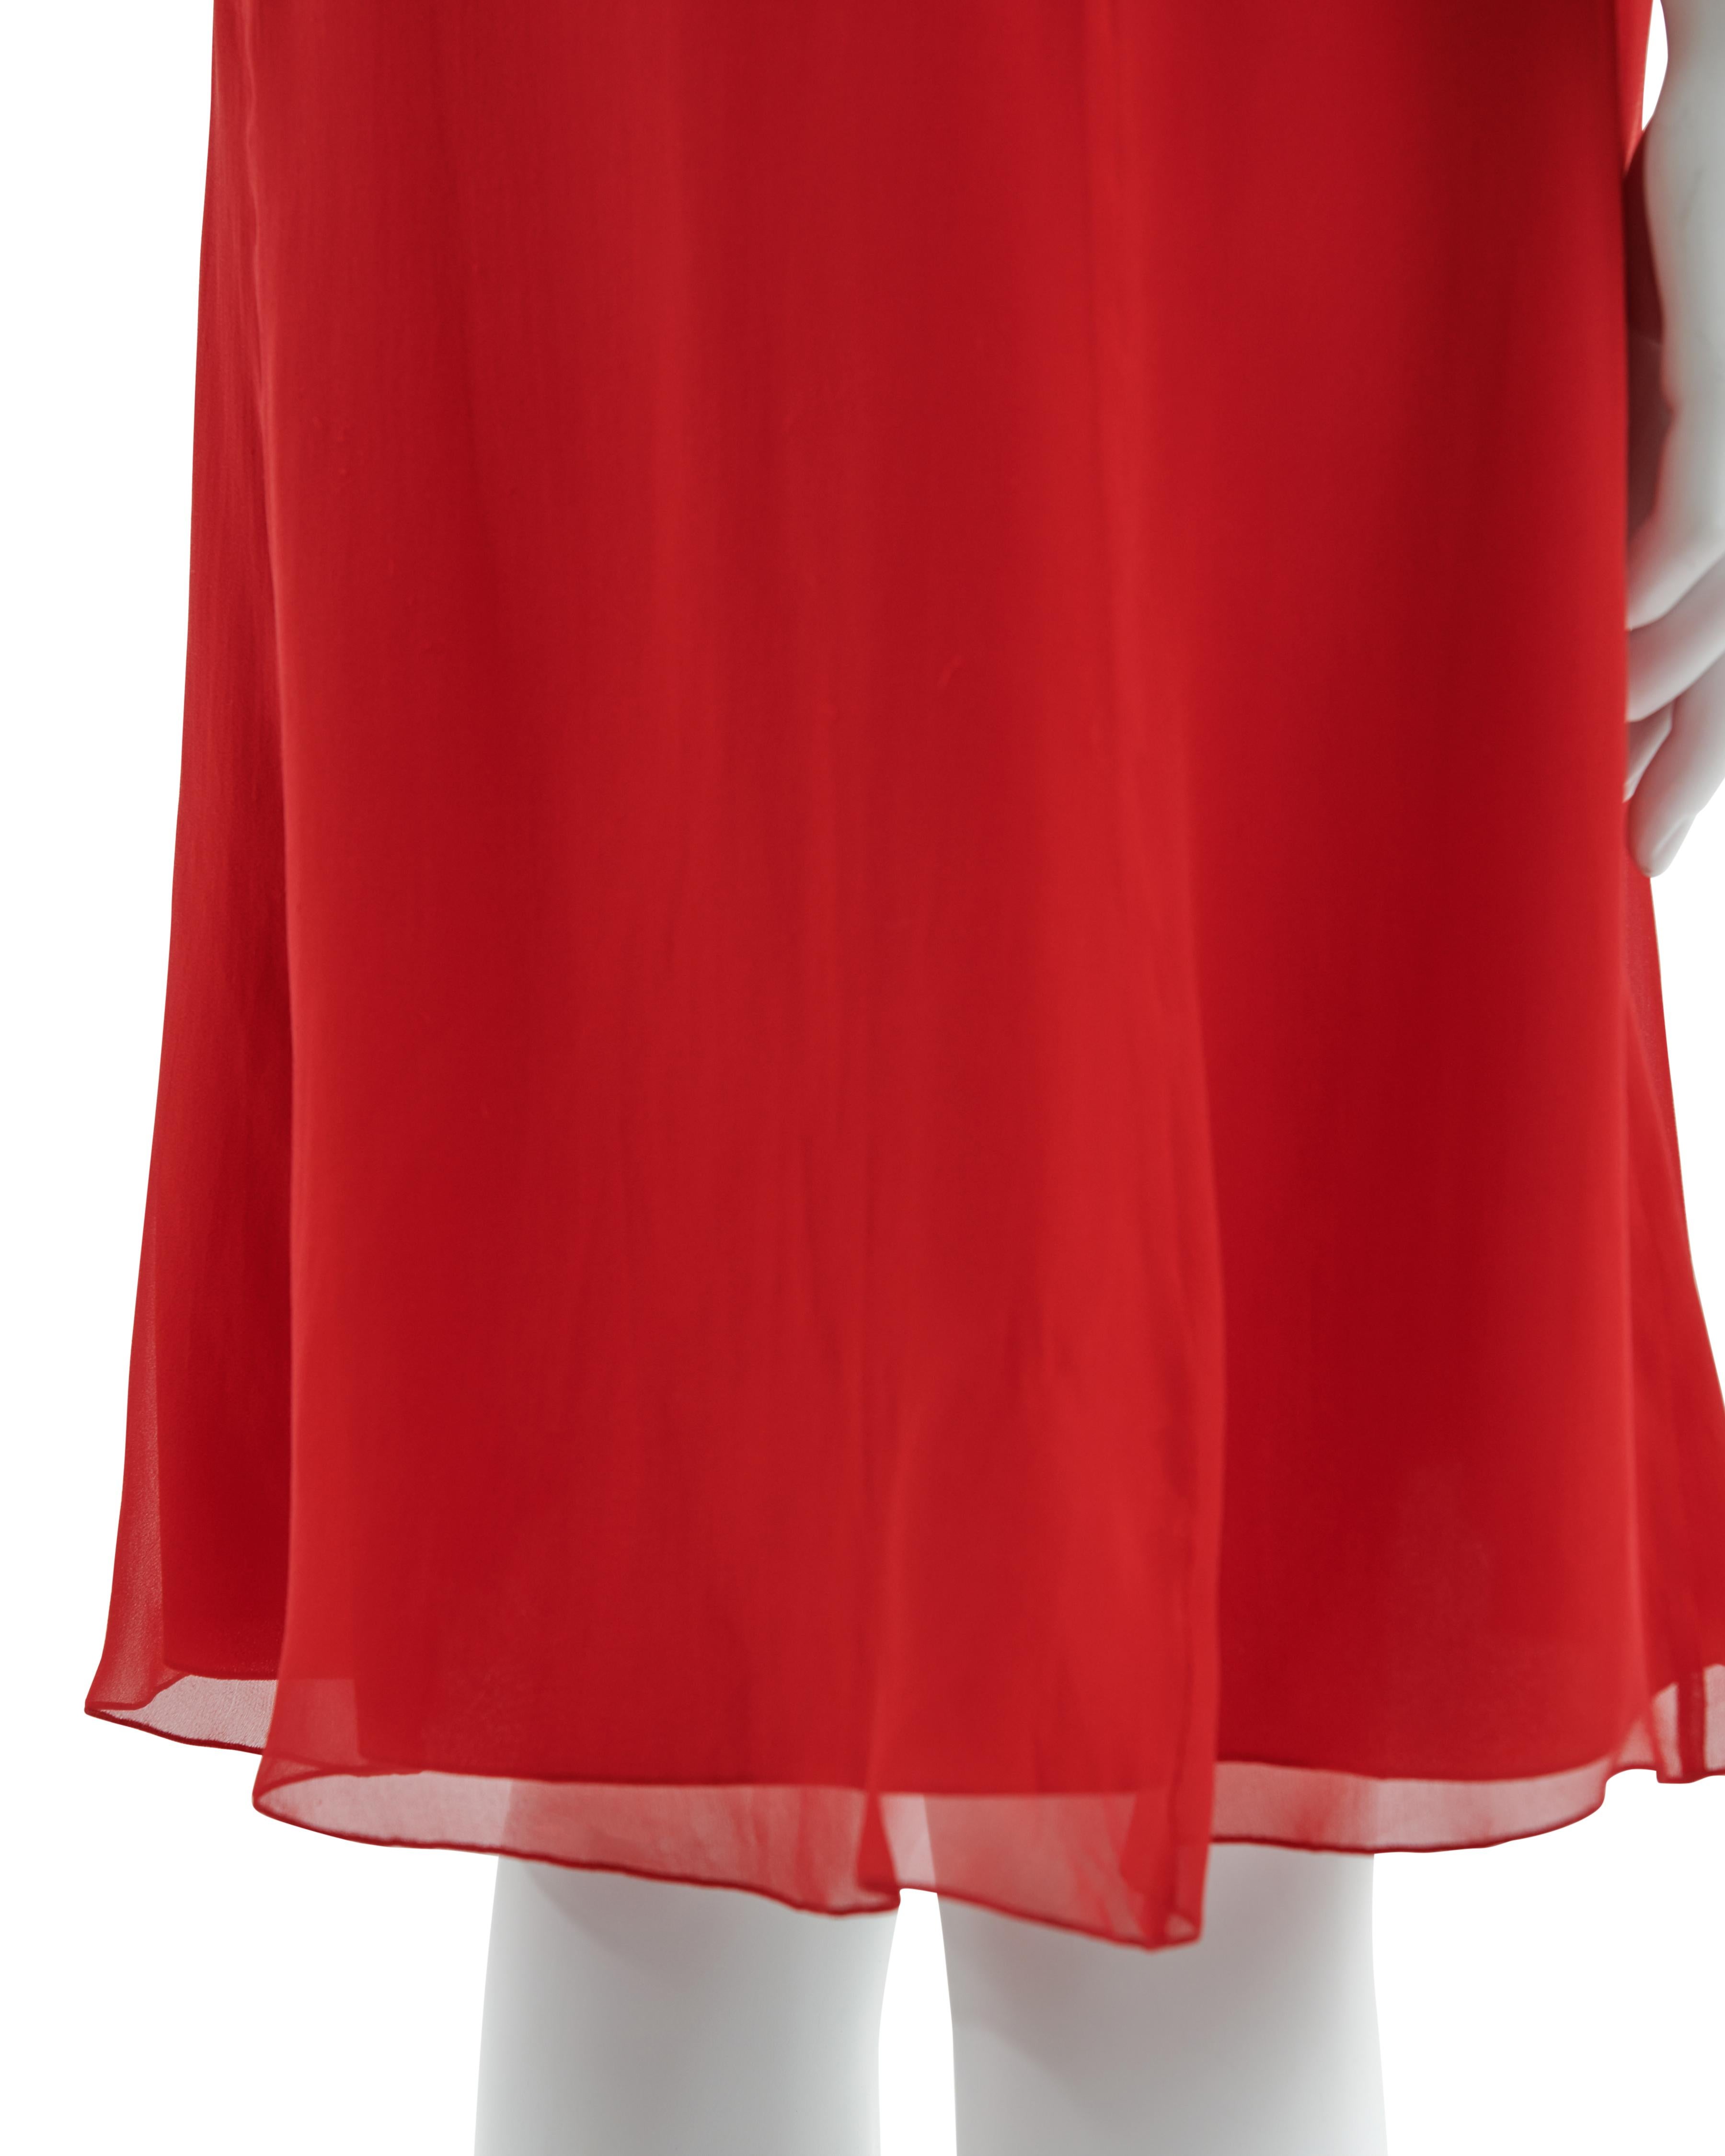 Valentino S/S 2007 Red halter neck chiffon cocktail dress For Sale 3